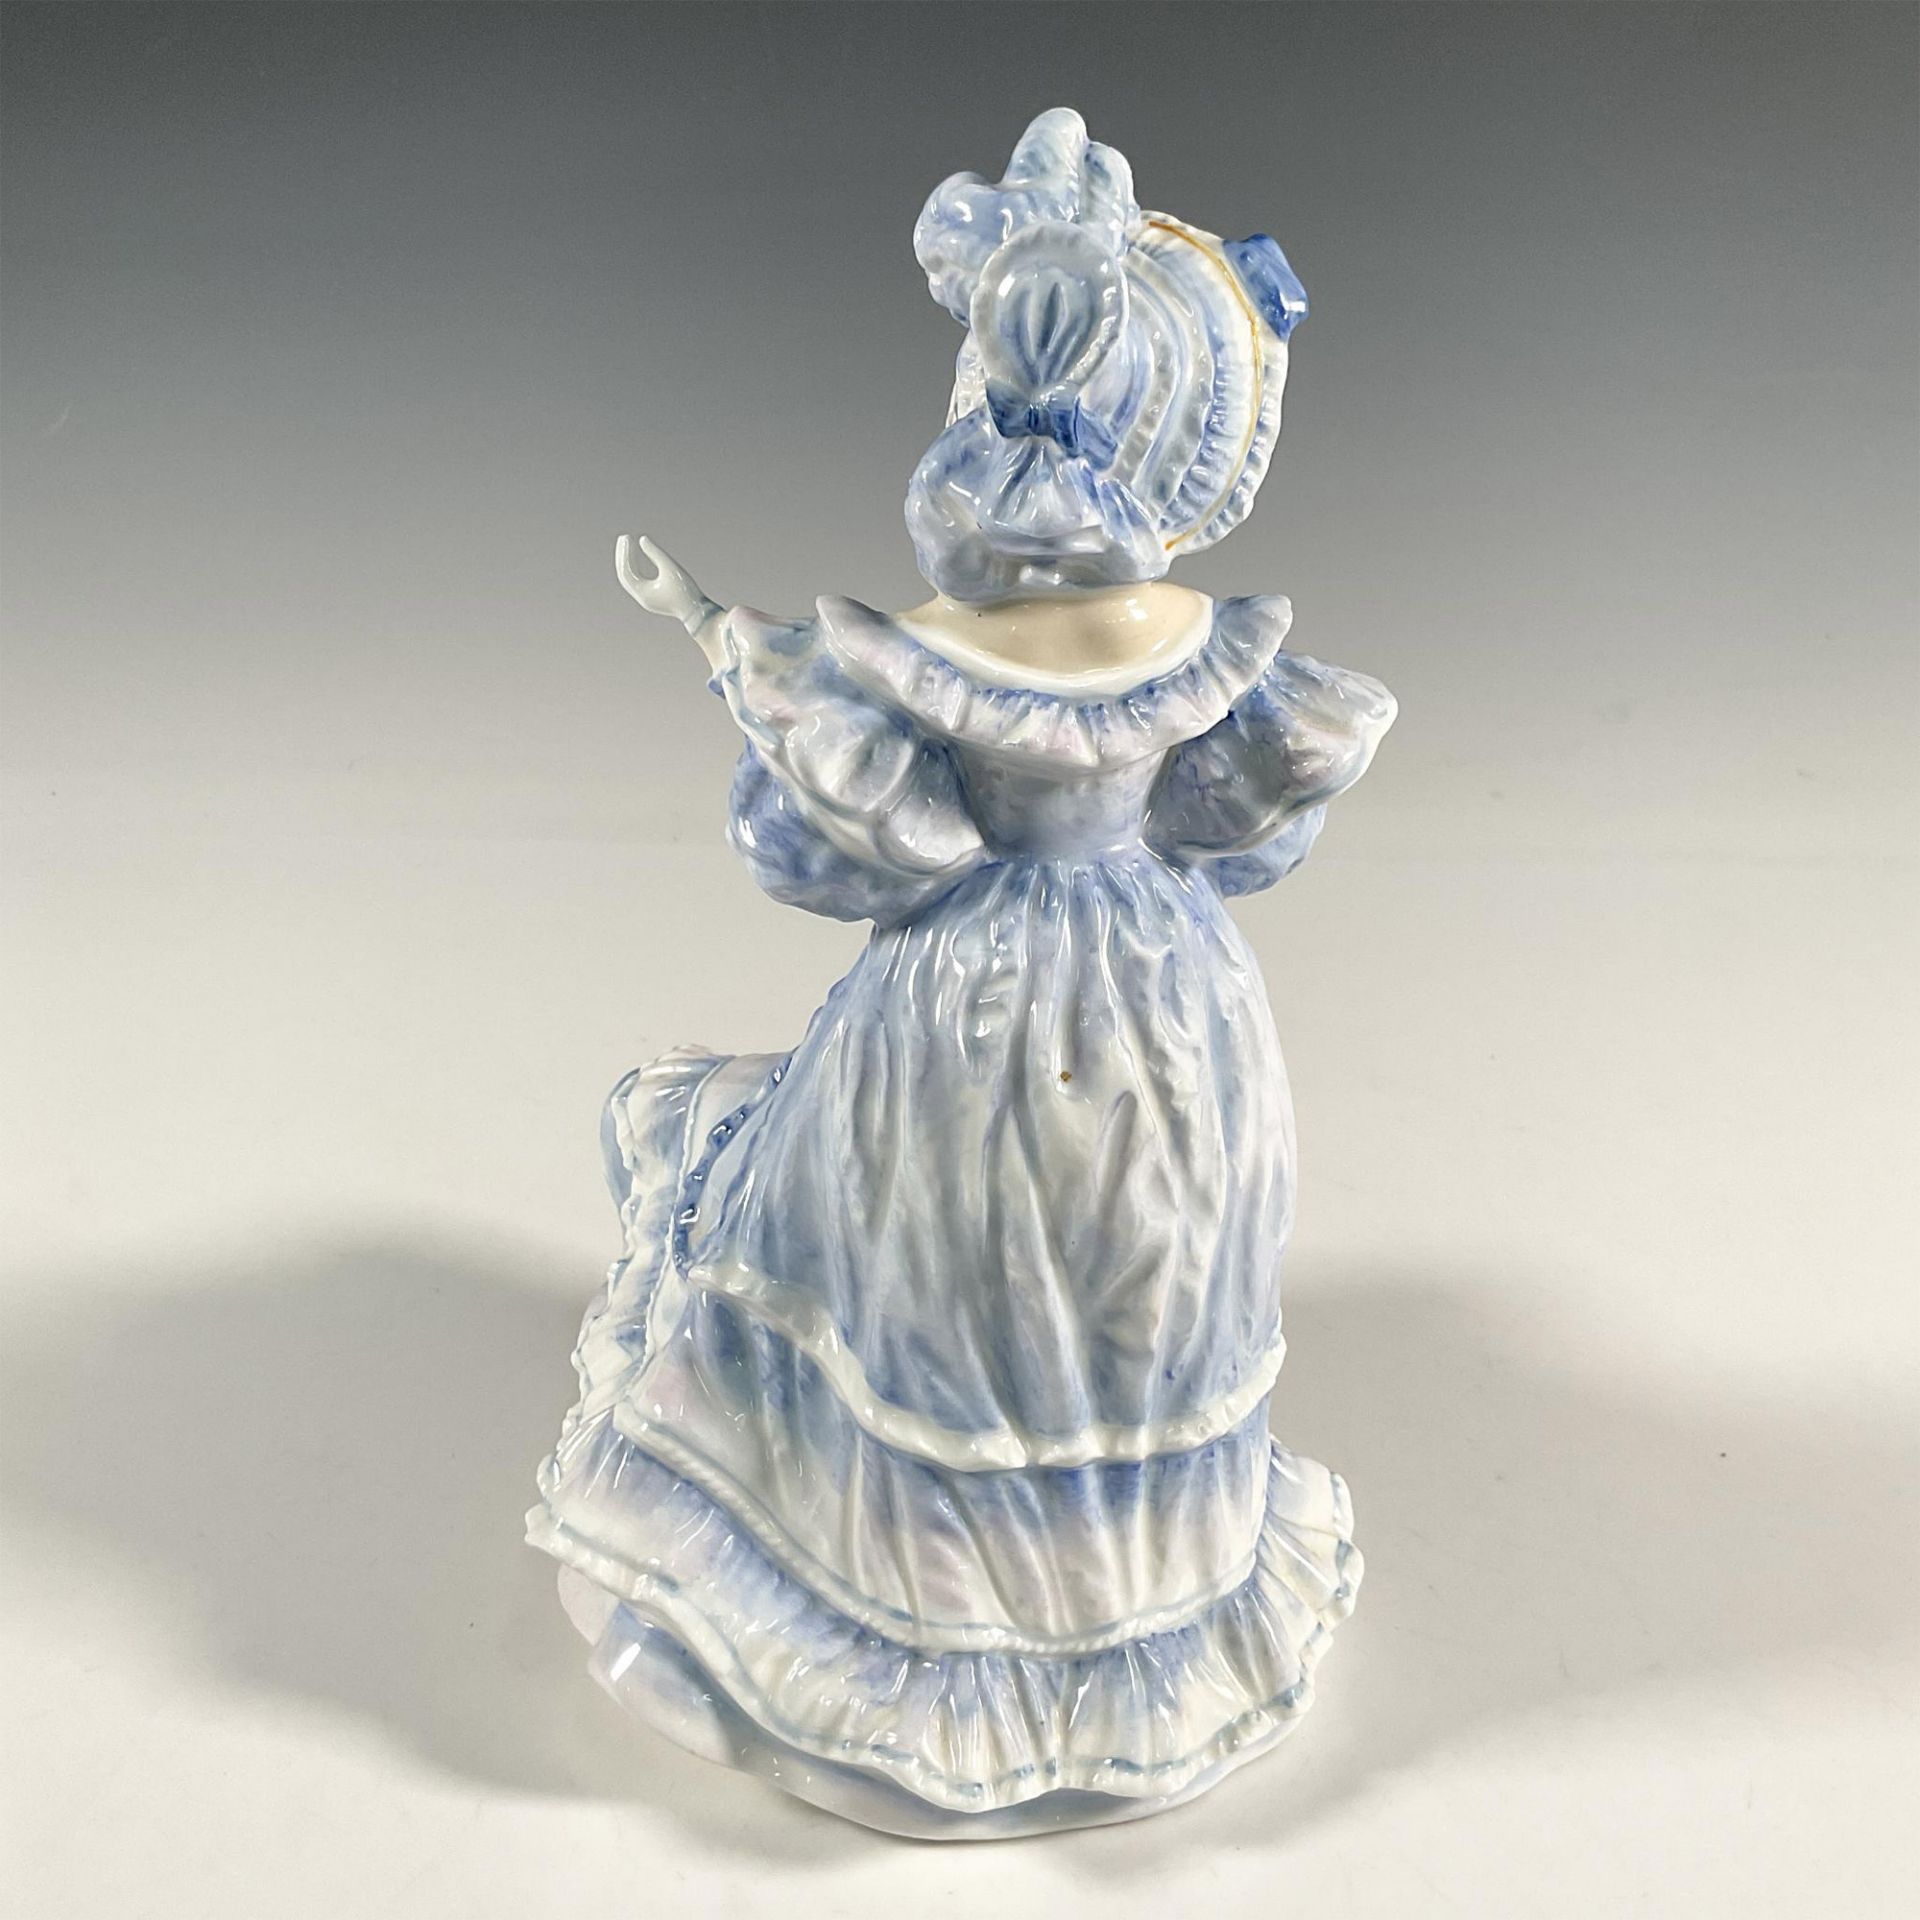 Forget Me Not - HN3700 - Royal Doulton Figurine - Image 2 of 3